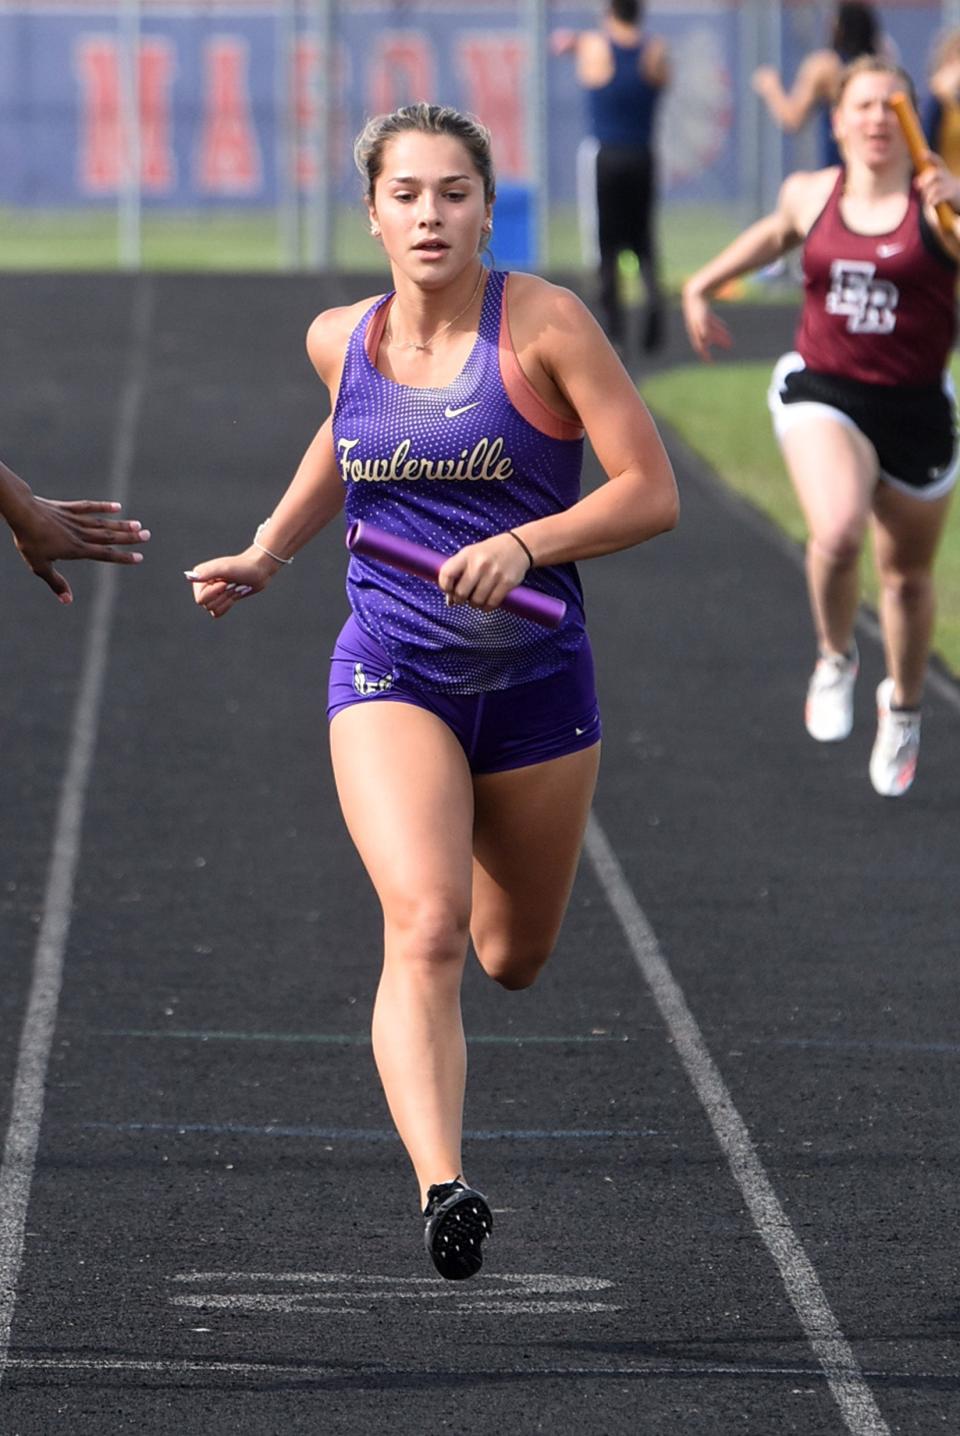 Fowlerville's Sarah Litz won both hurdles events and was on a winning relay in the regional track and field meet in Williamston.